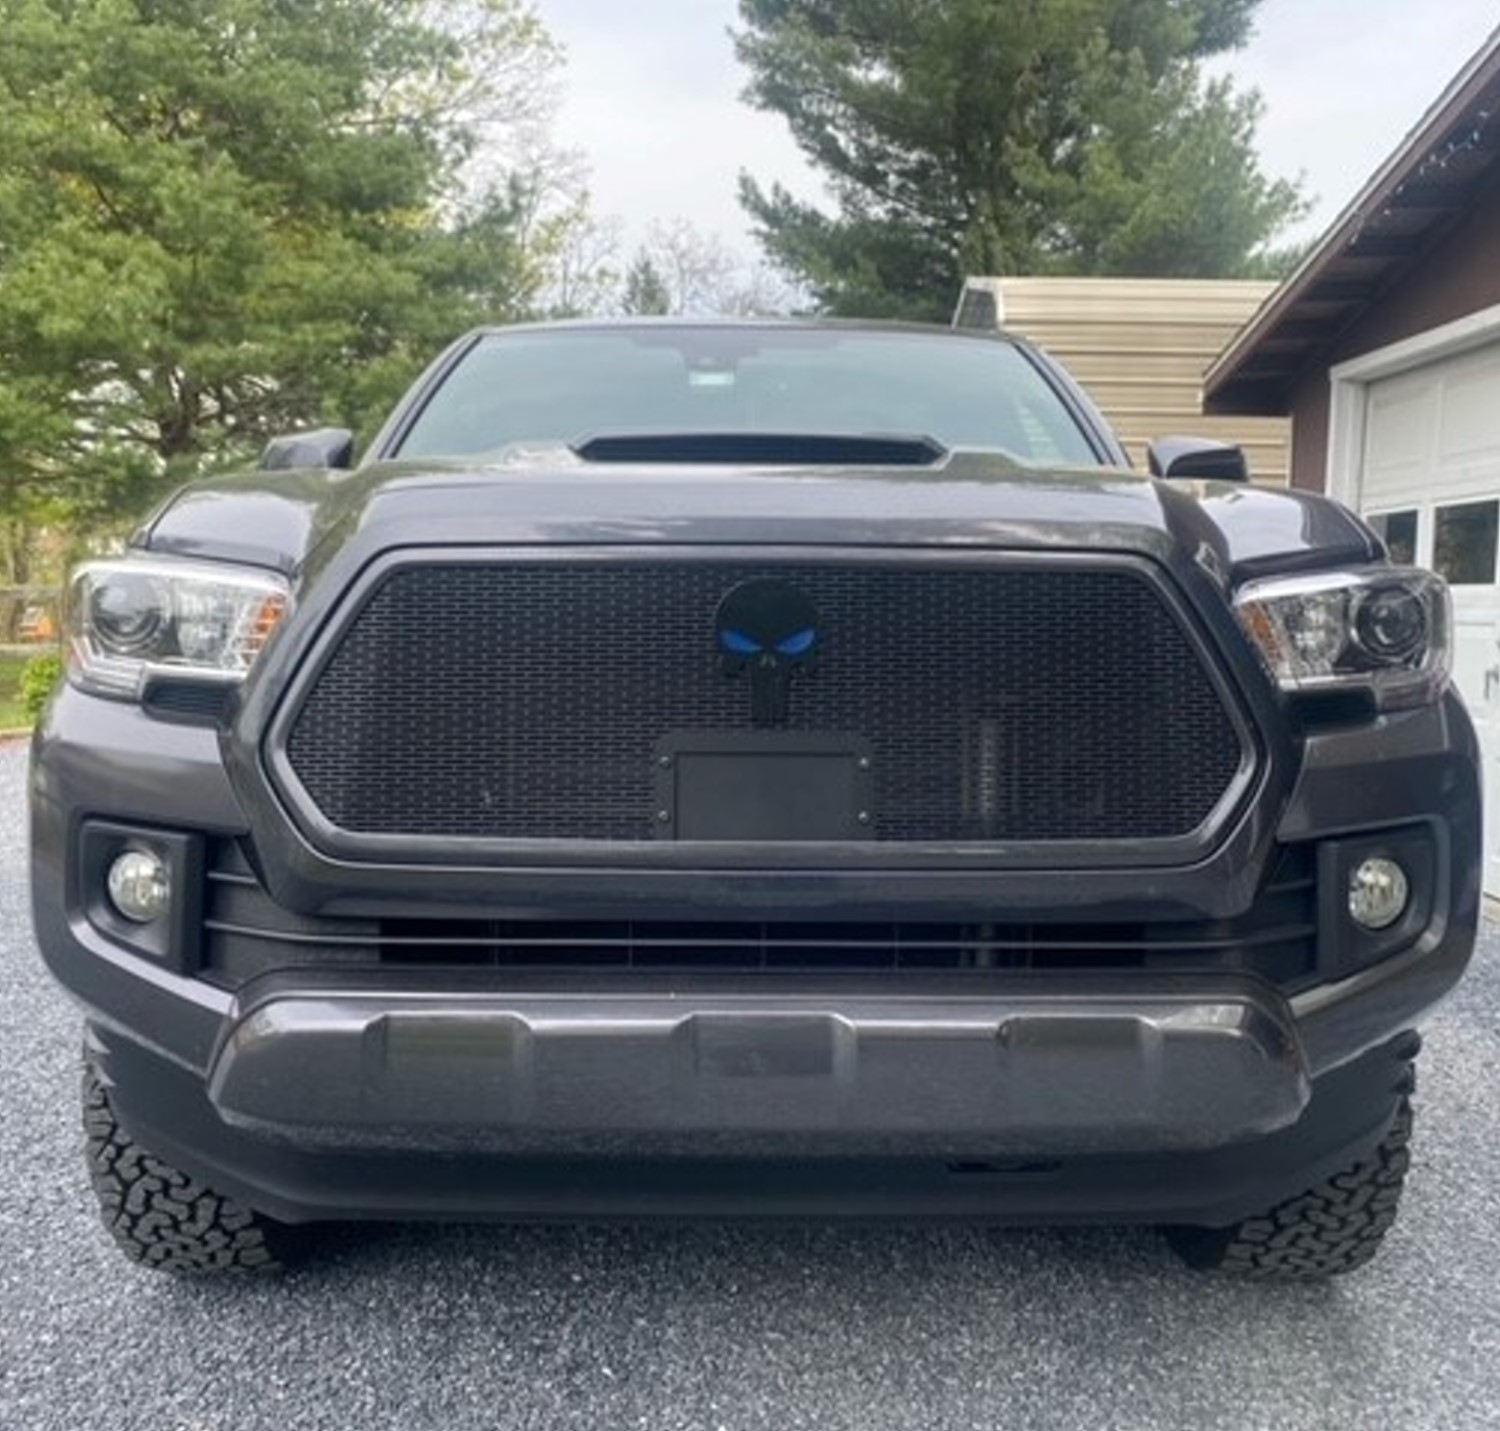 Make a Statement with a Custom Emblem and Grille for Your Tacoma